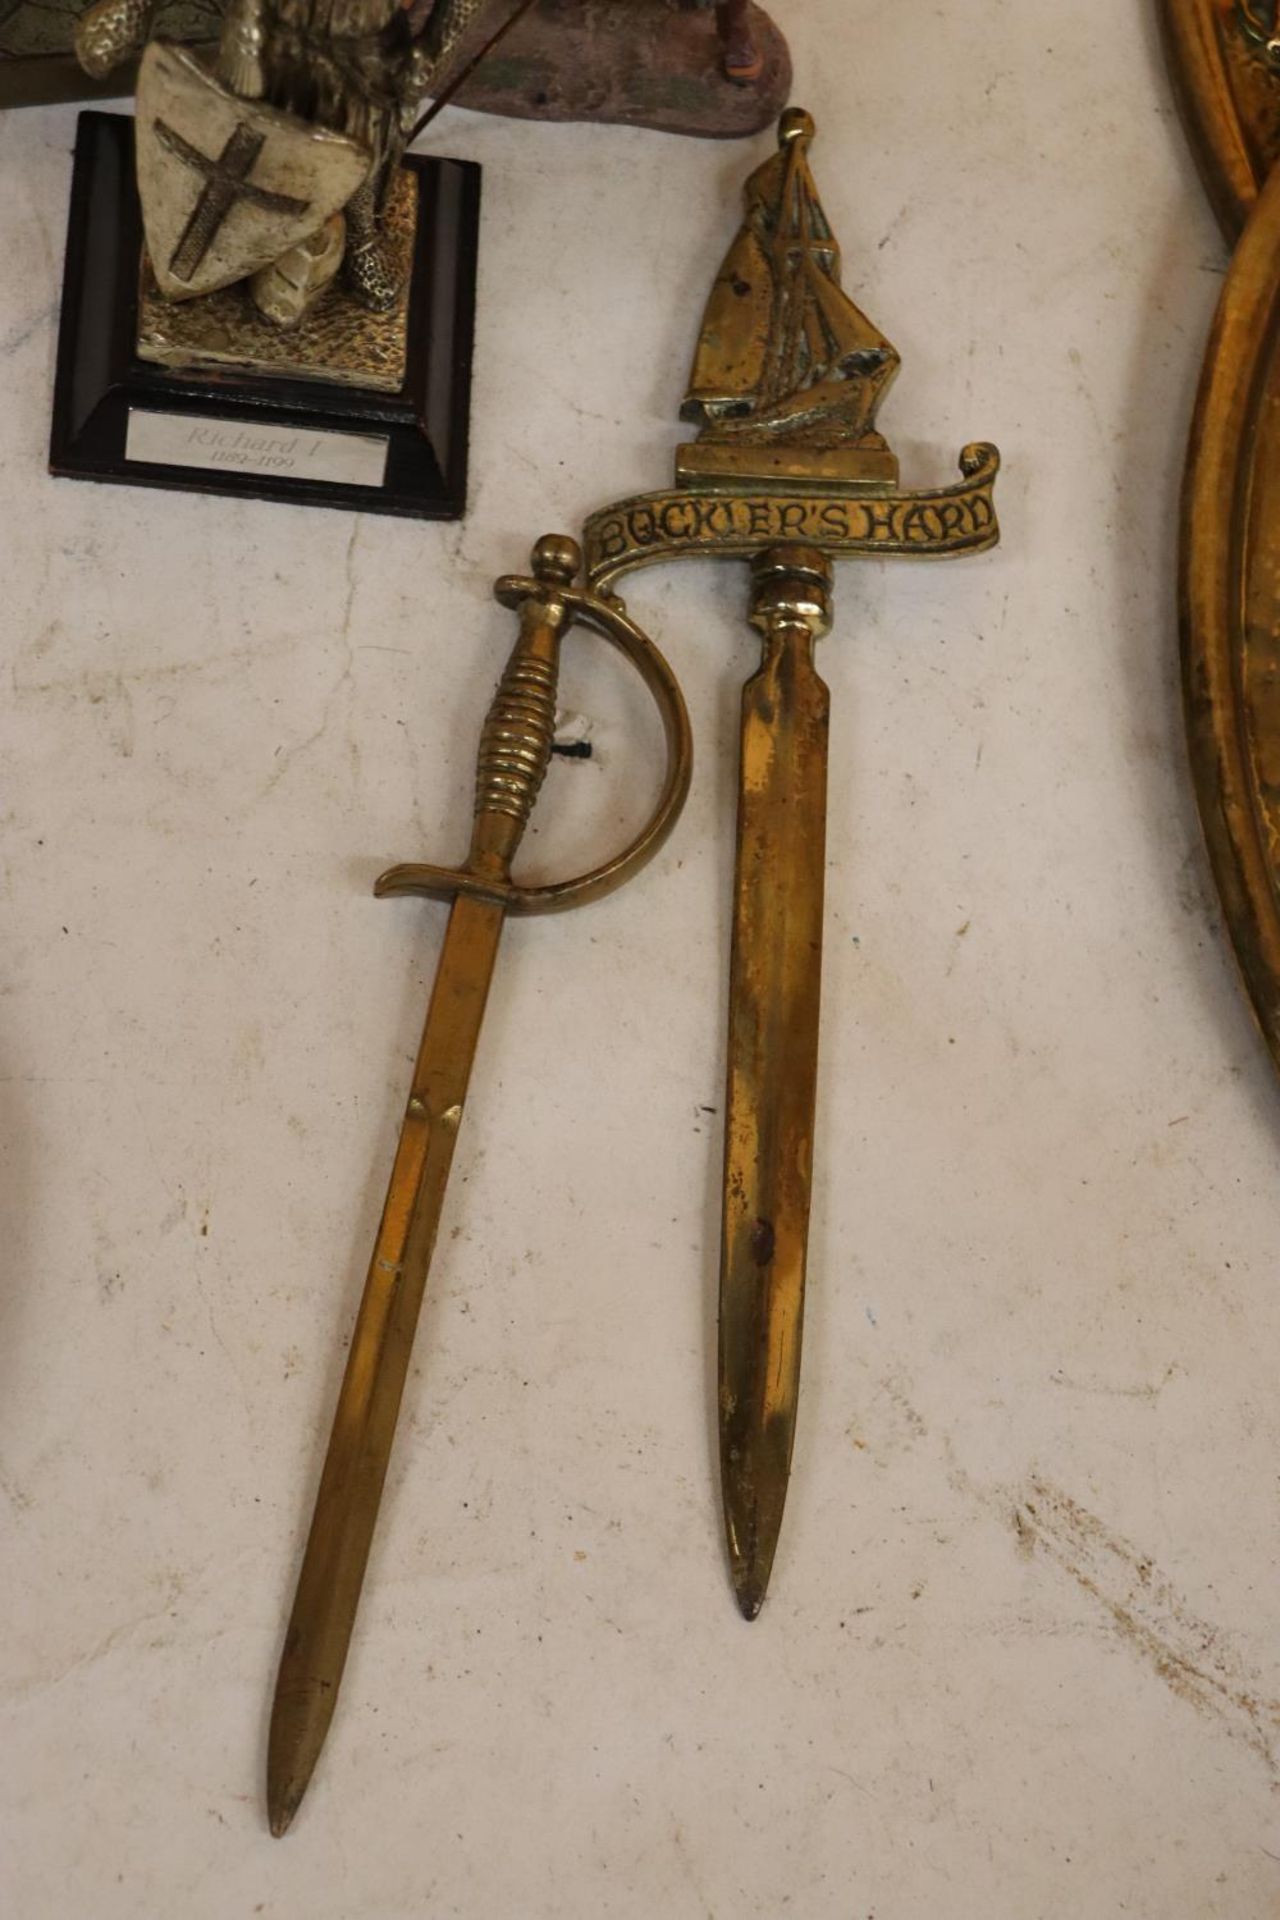 THREE SMALL MODELS OF KNIGHTS PLUS TWO BRASS SWORD LETTER OPENERS - Image 2 of 6